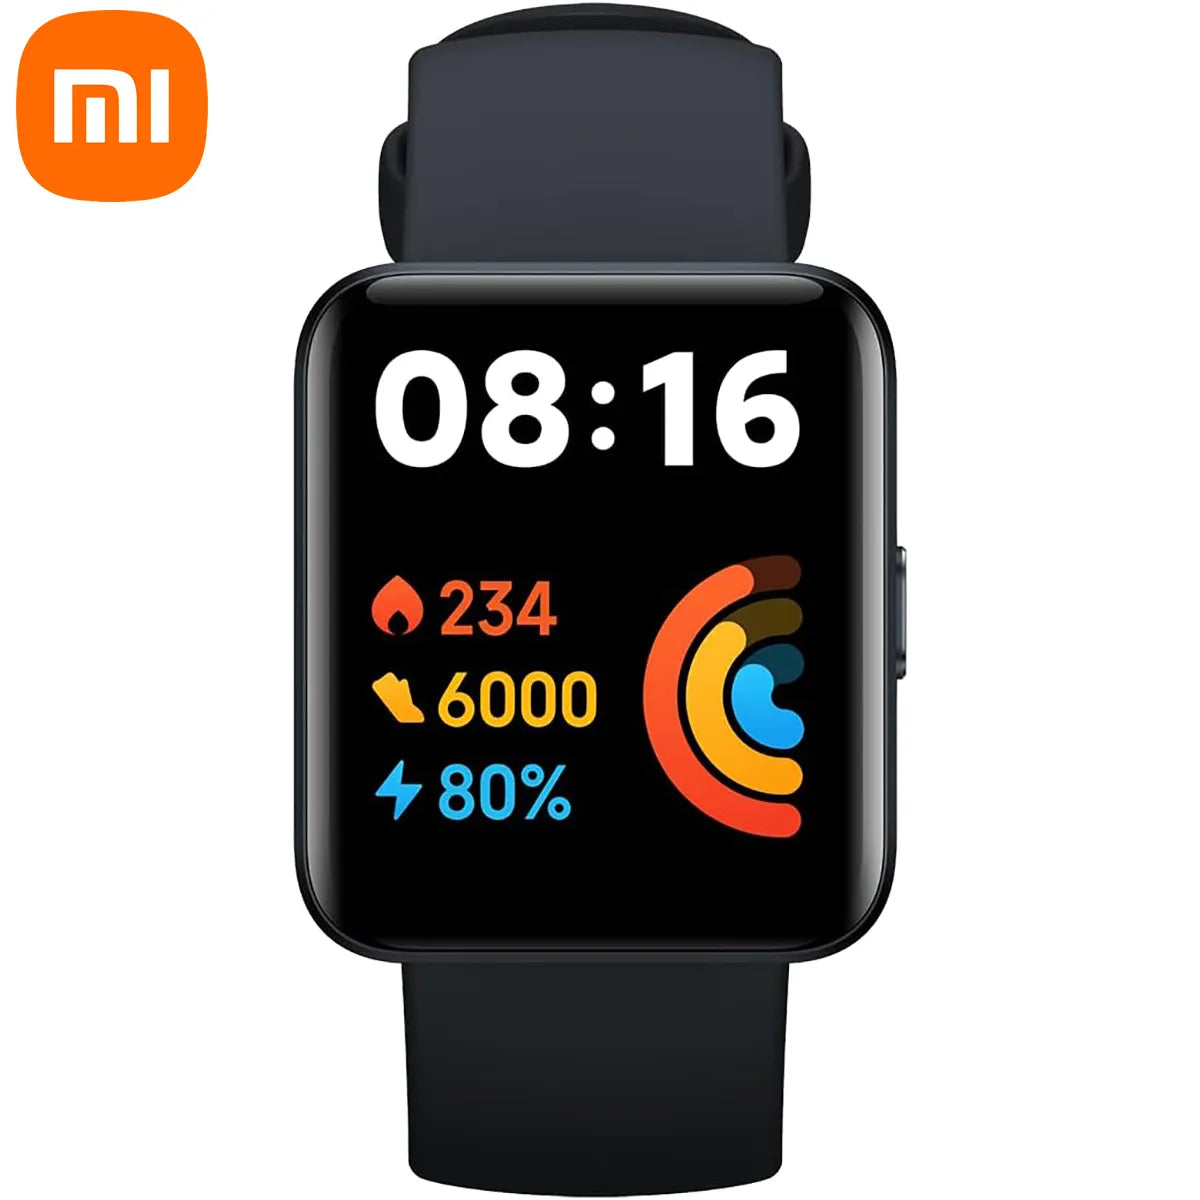 Original Xiaomi Redmi Watch 2 Lite, 100+ Fitness Modes, 1.55" Colorful Touch Display, 5 ATM Water Resistance, SPO₂ Measurement,